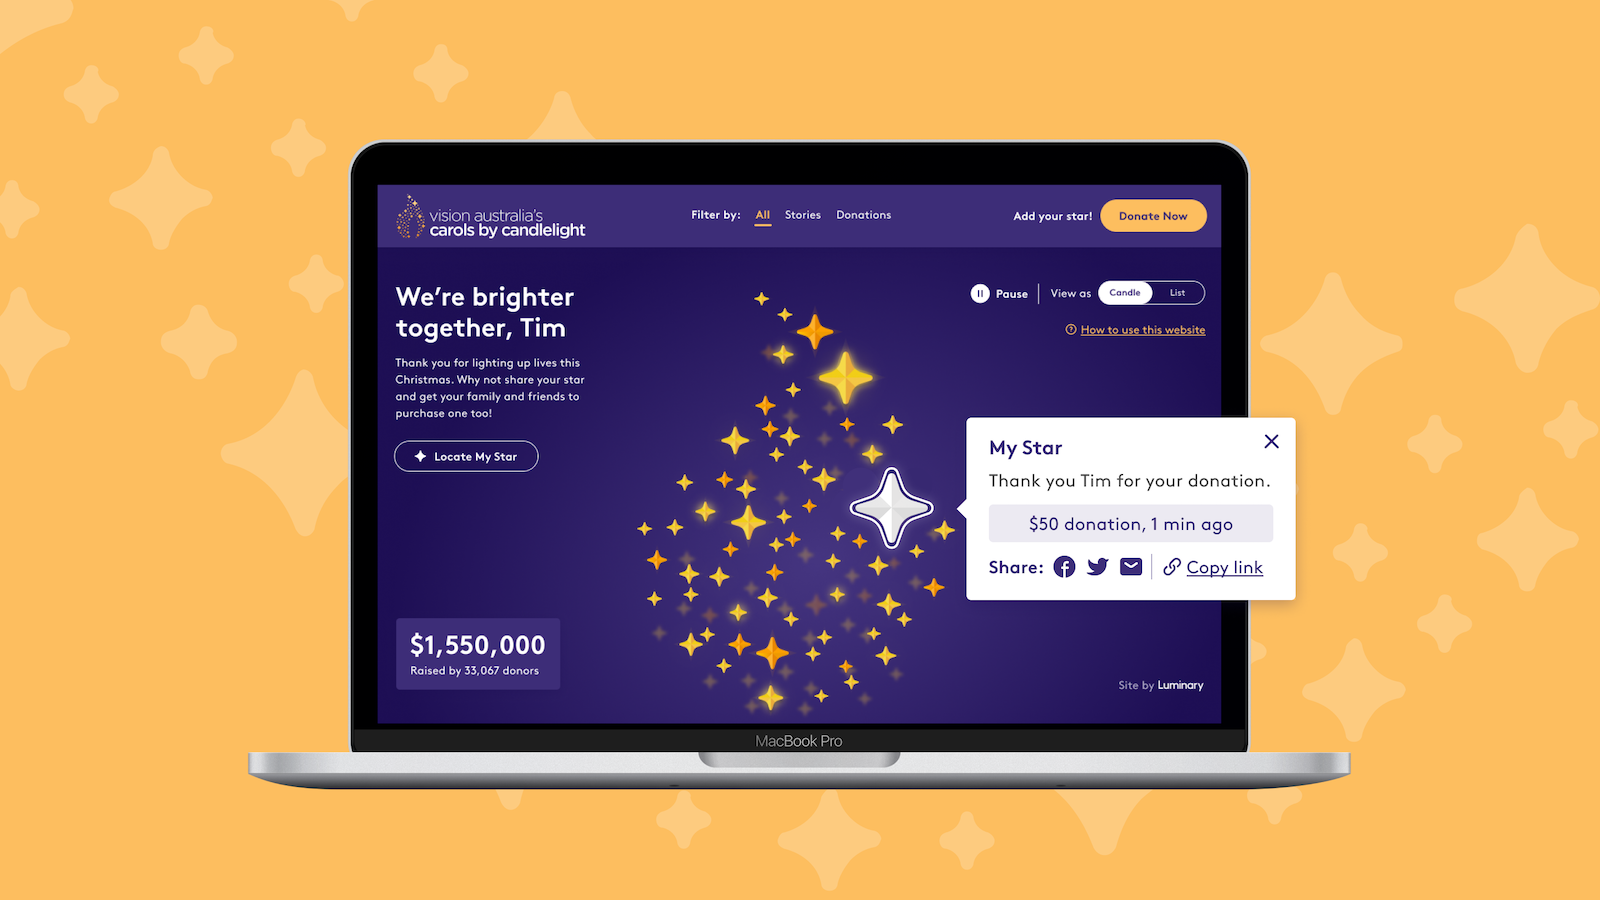 Carols by Candlelight campaign website 